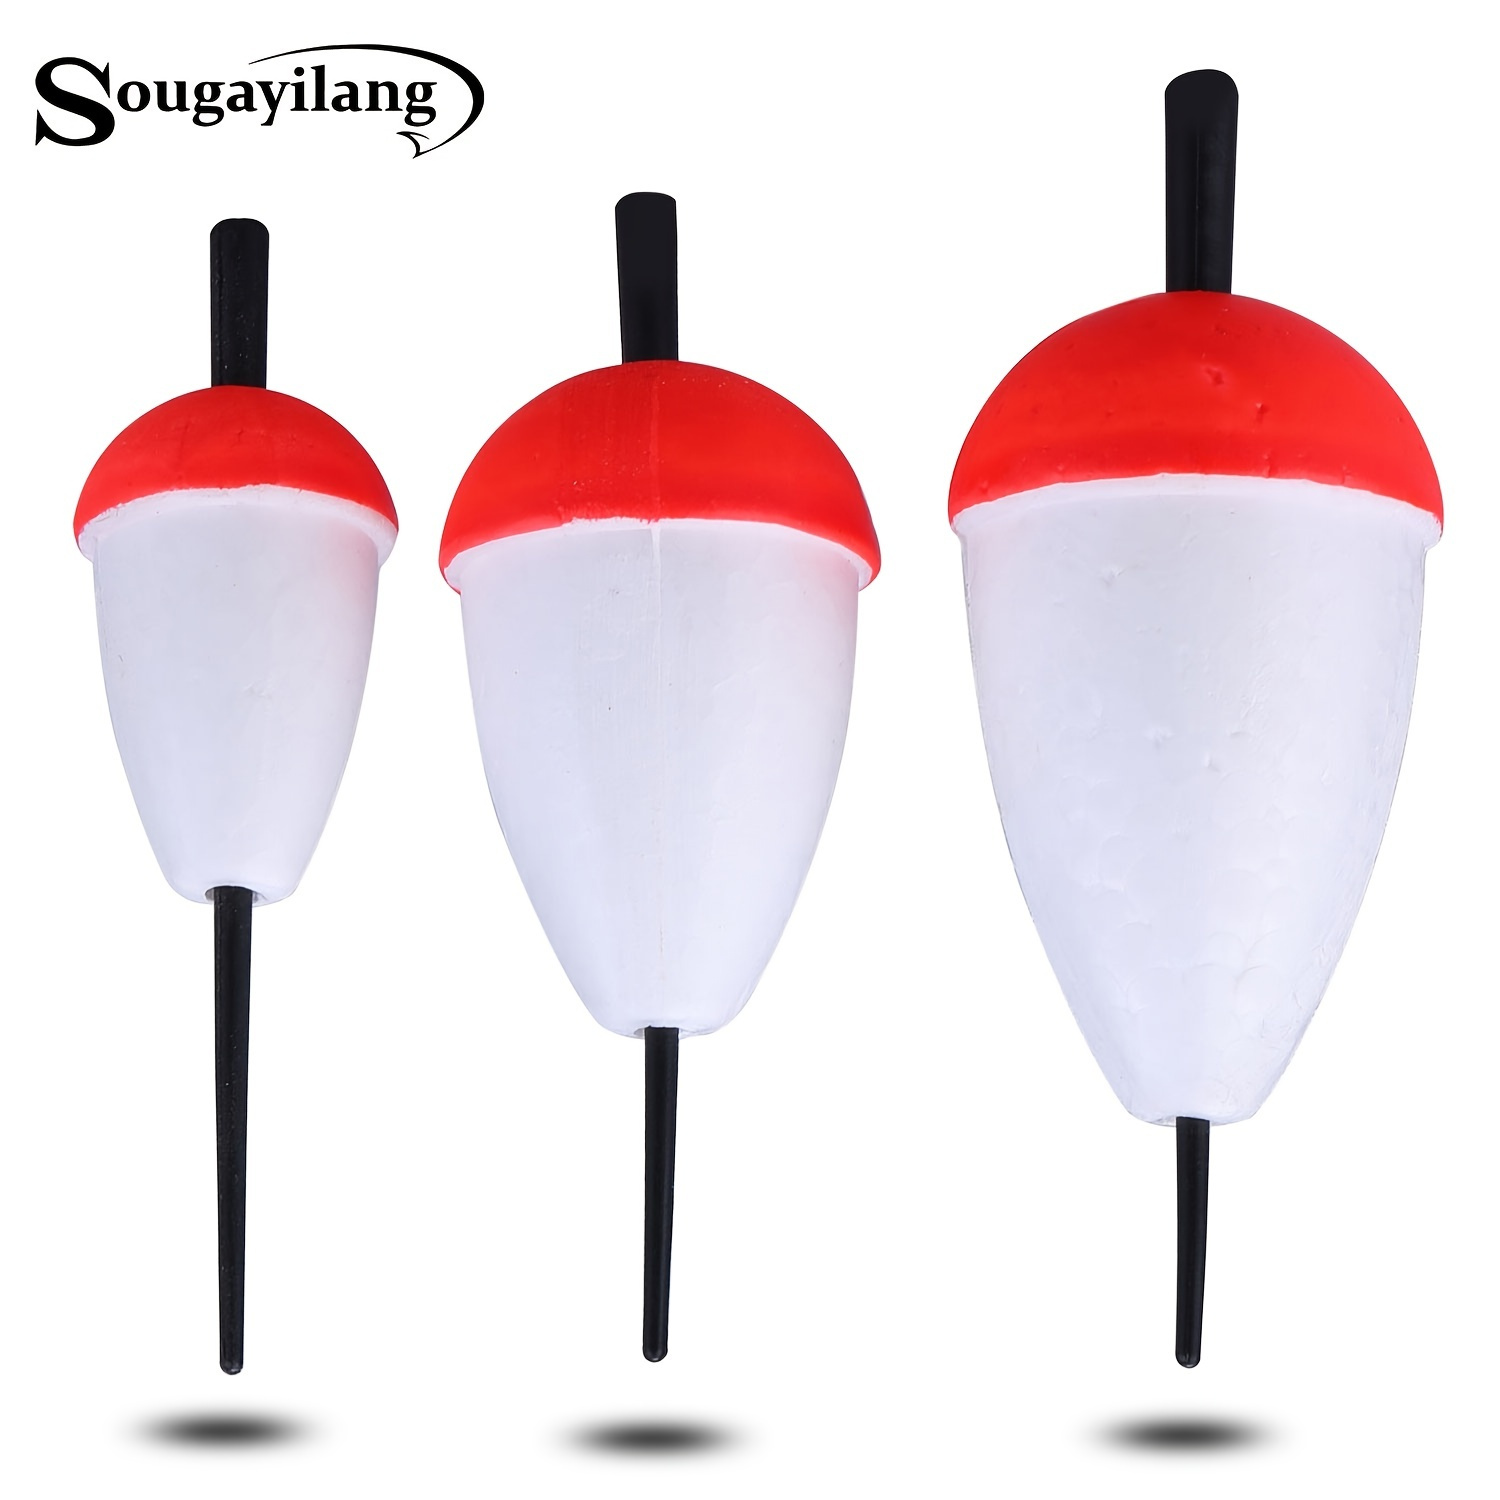 SOUGAYILANG Hard Foam Fishing Floats - Lightweight Sea Fish Bobbers with  Sticks for Accurate Fishing and Easy Visibility